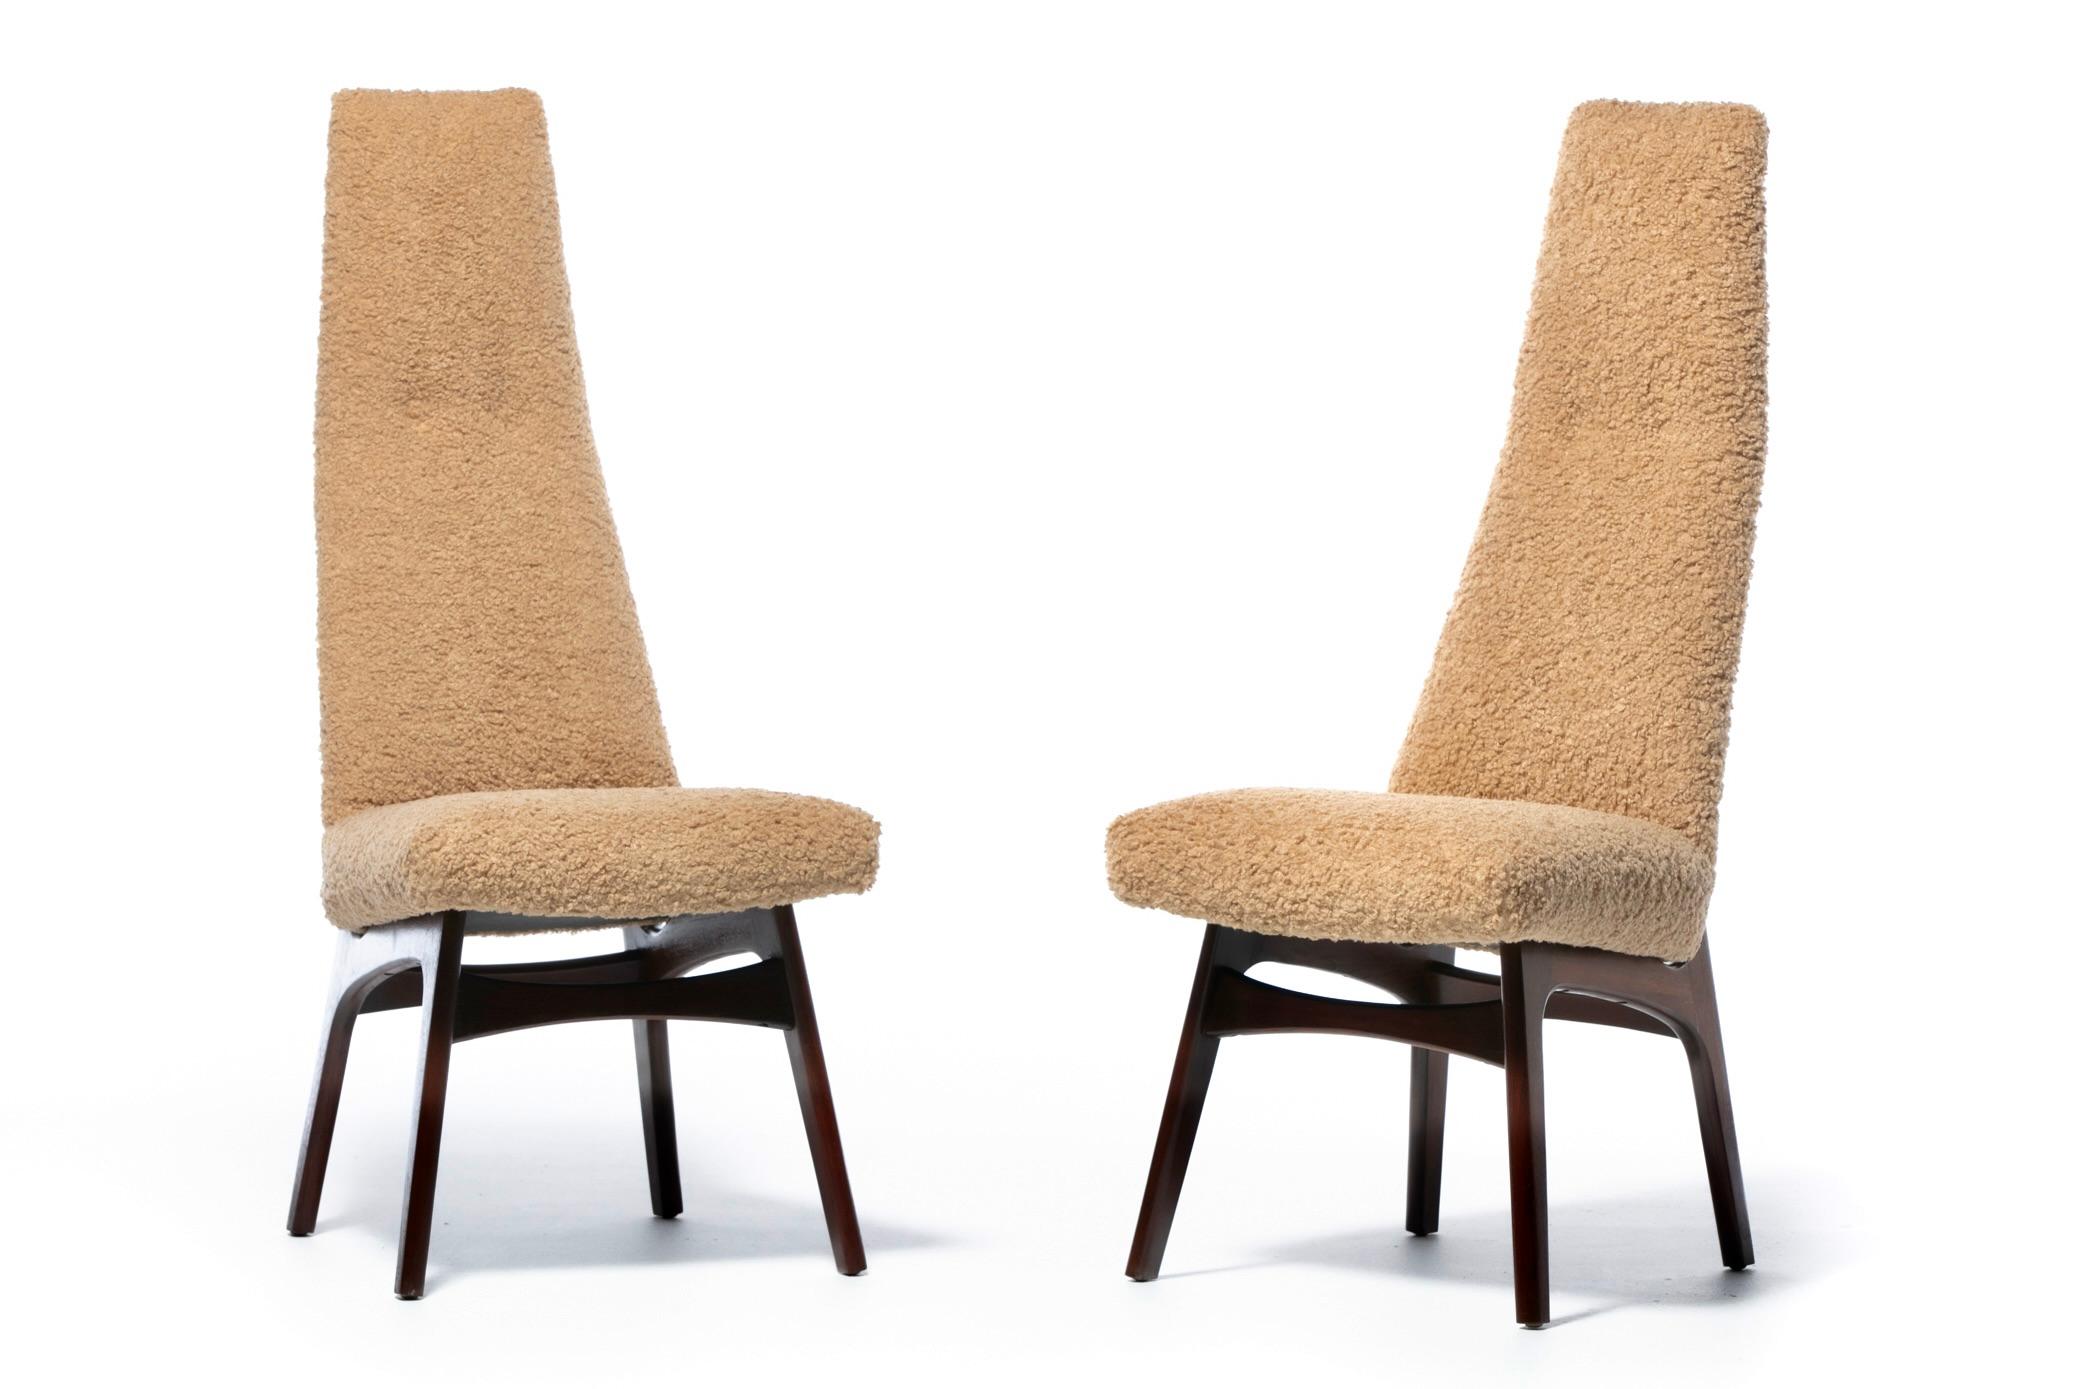 Set of 12 Adrian Pearsall Sculptural High Back Dining Chairs in Latte Bouclé In Good Condition For Sale In Saint Louis, MO